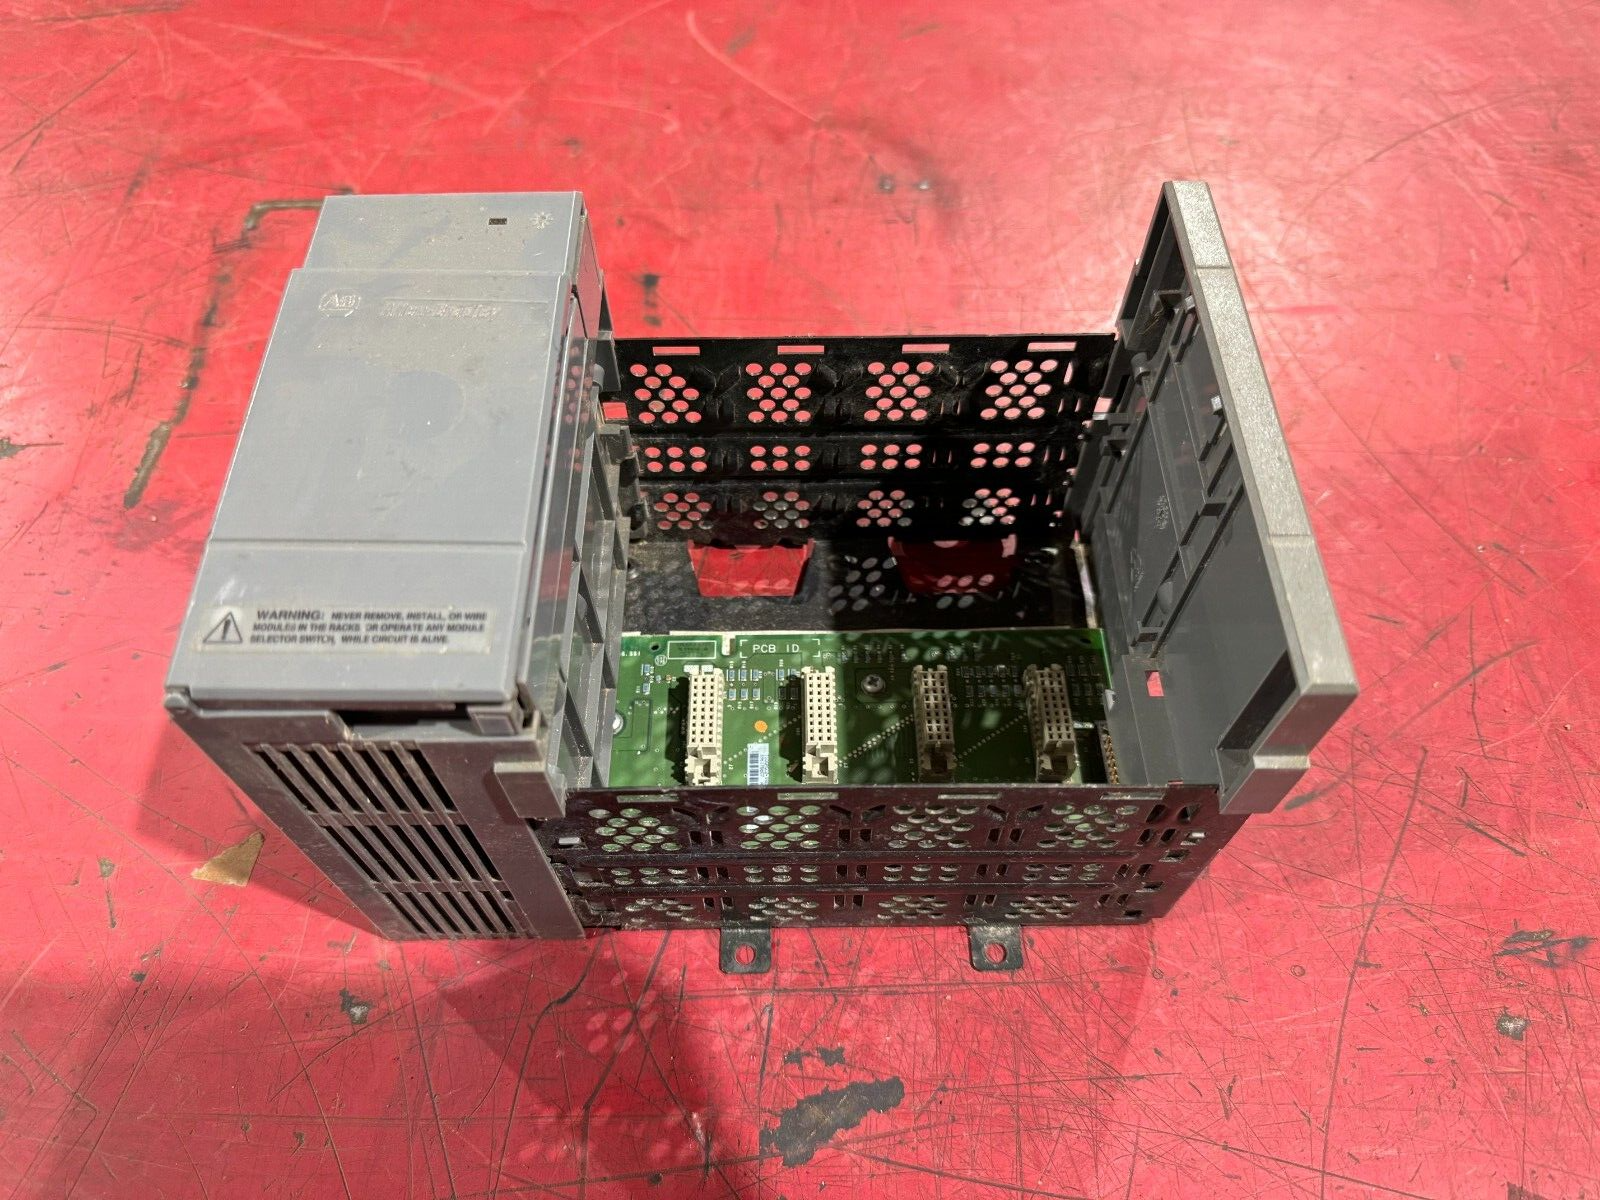 USED ALLEN-BRADLEY SLC 500 SLOT RACK 1746-A4 WITH 1746-P1 POWER SUPPLY